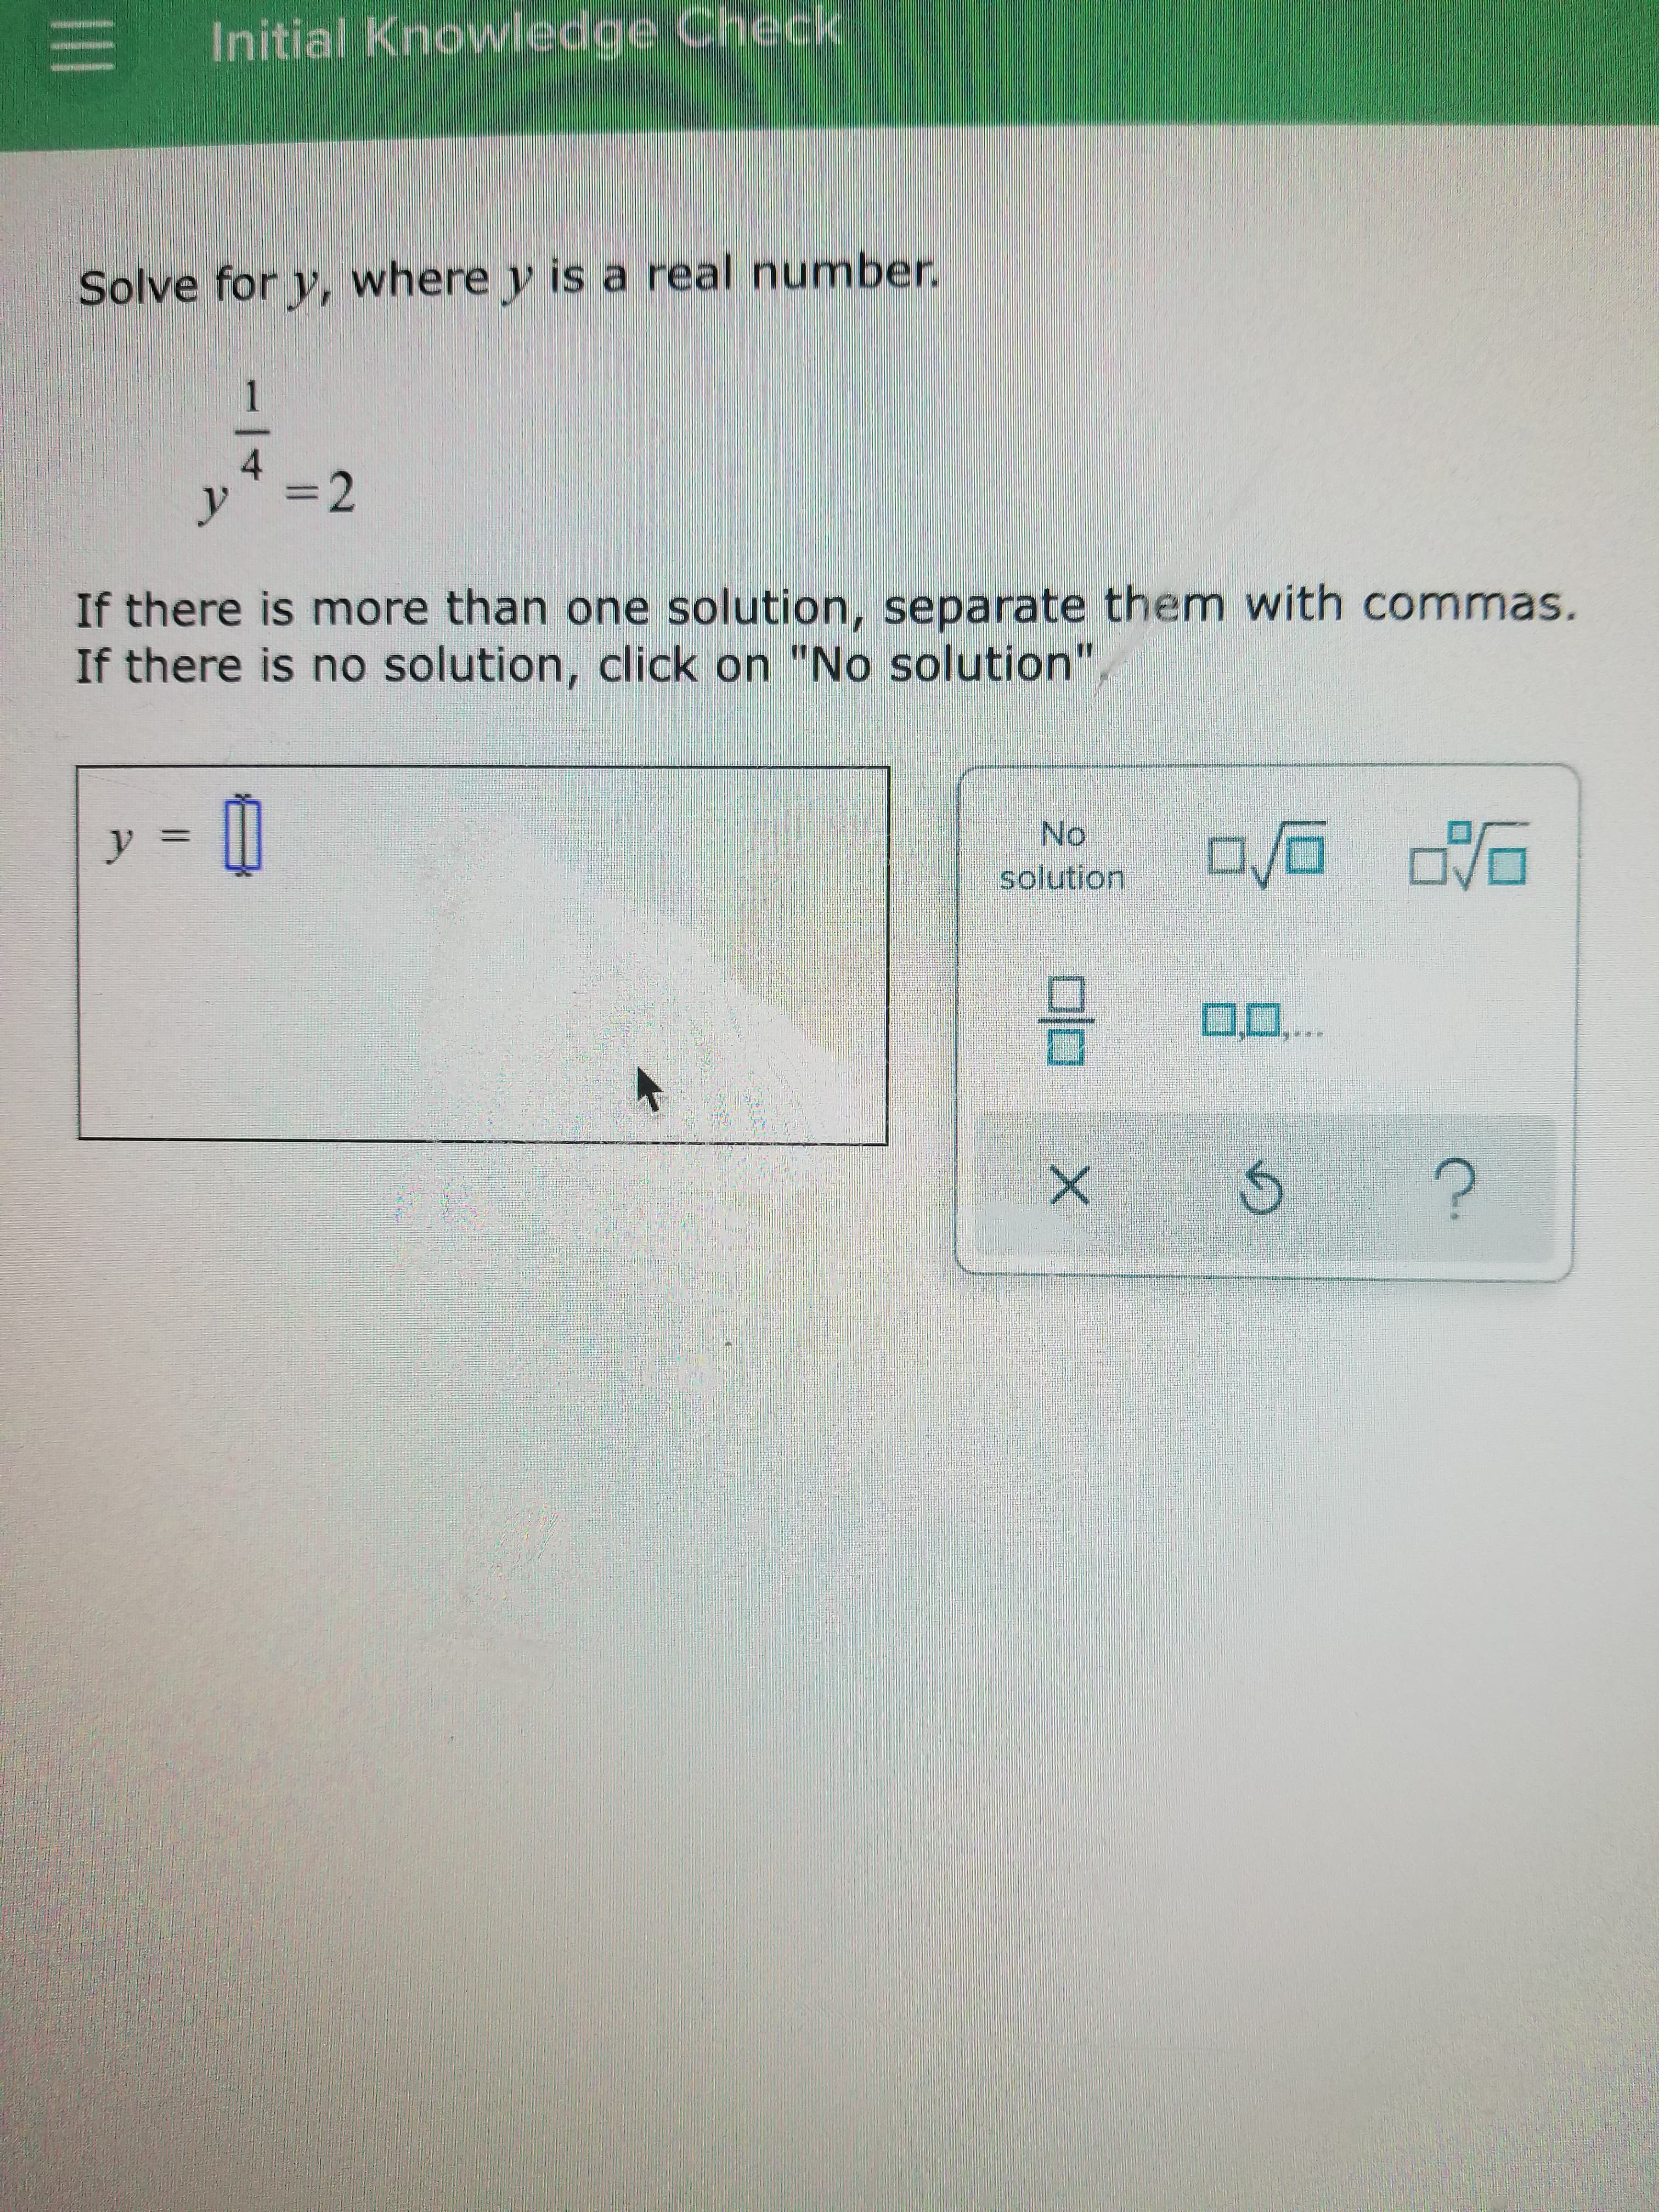 Initial Knowledge Check
Solve for y, where y is a real number.
1.
4.
=2
If there is more than one solution, separate them with commas.
If there is no solution, click on "No solution
No.
solution
0.
